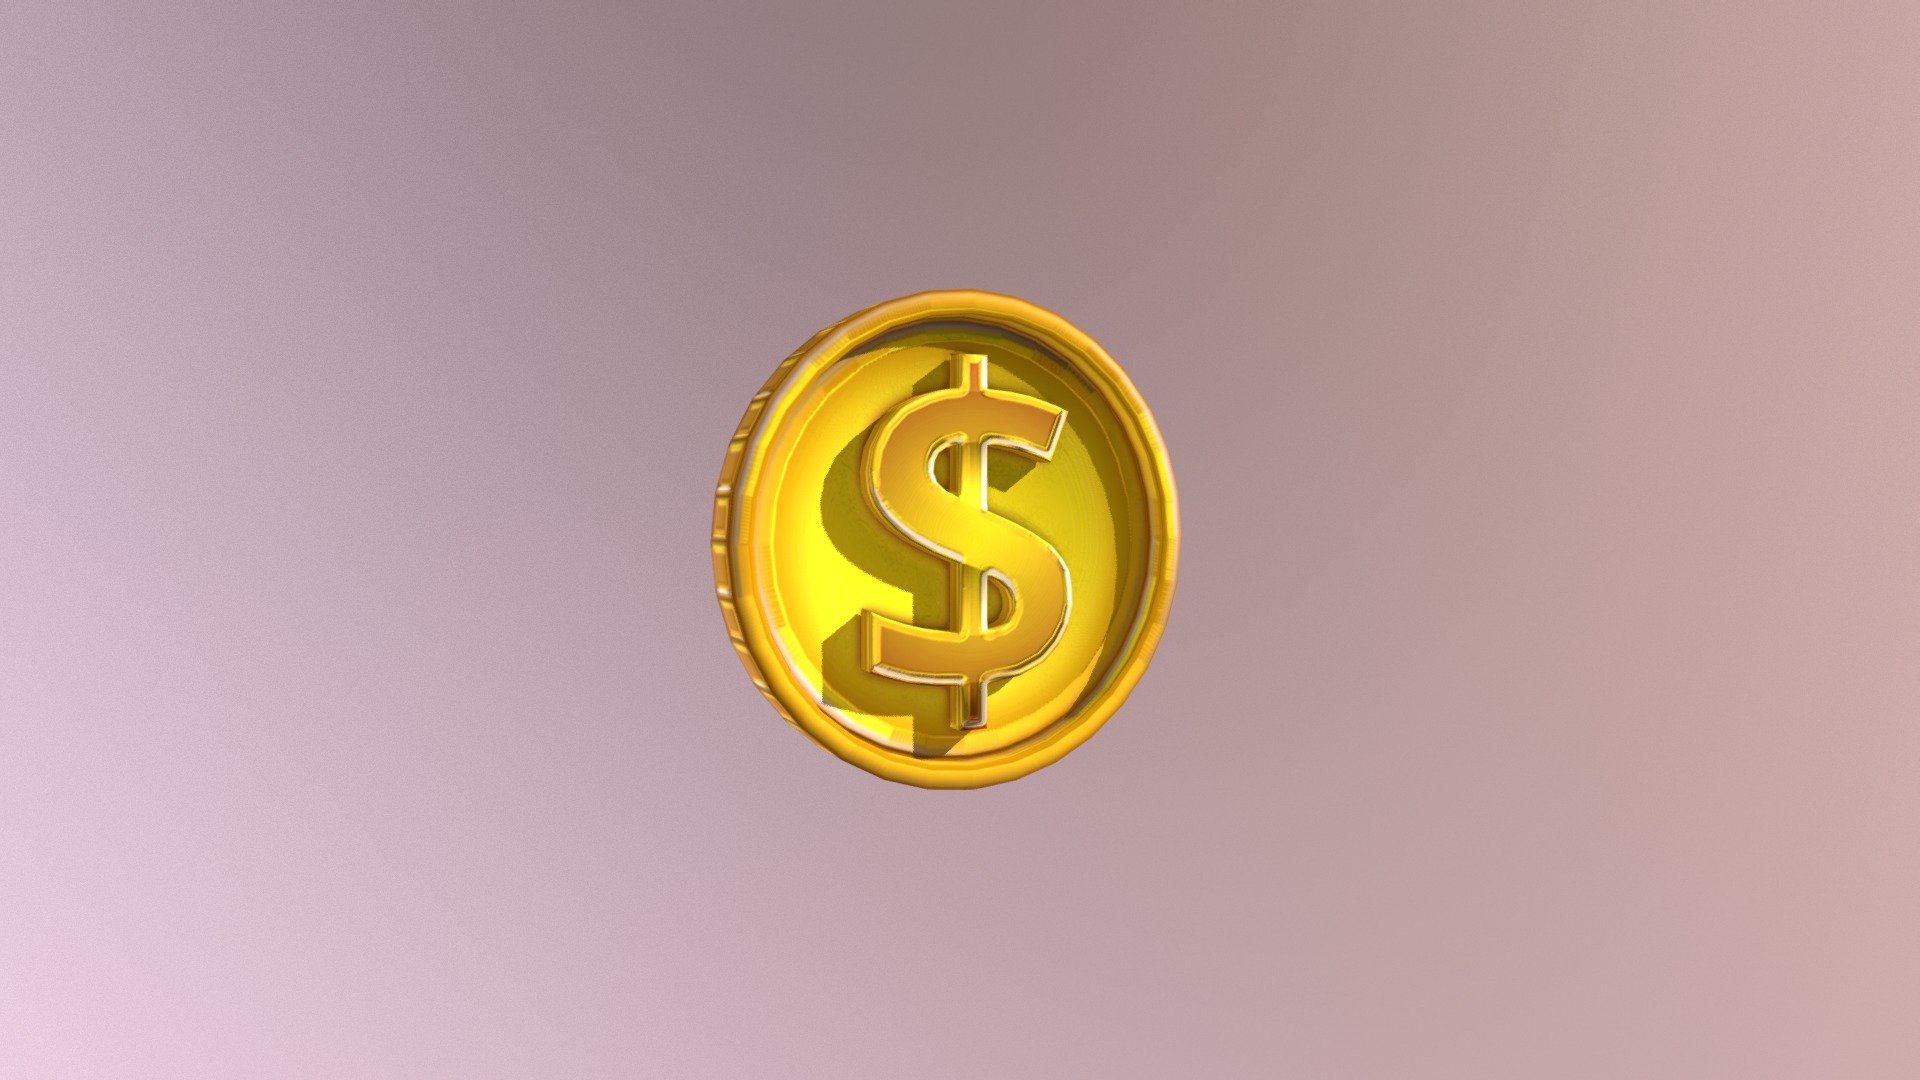 This is a test to make sure this model works.  It's a golden dollar coin 3d model